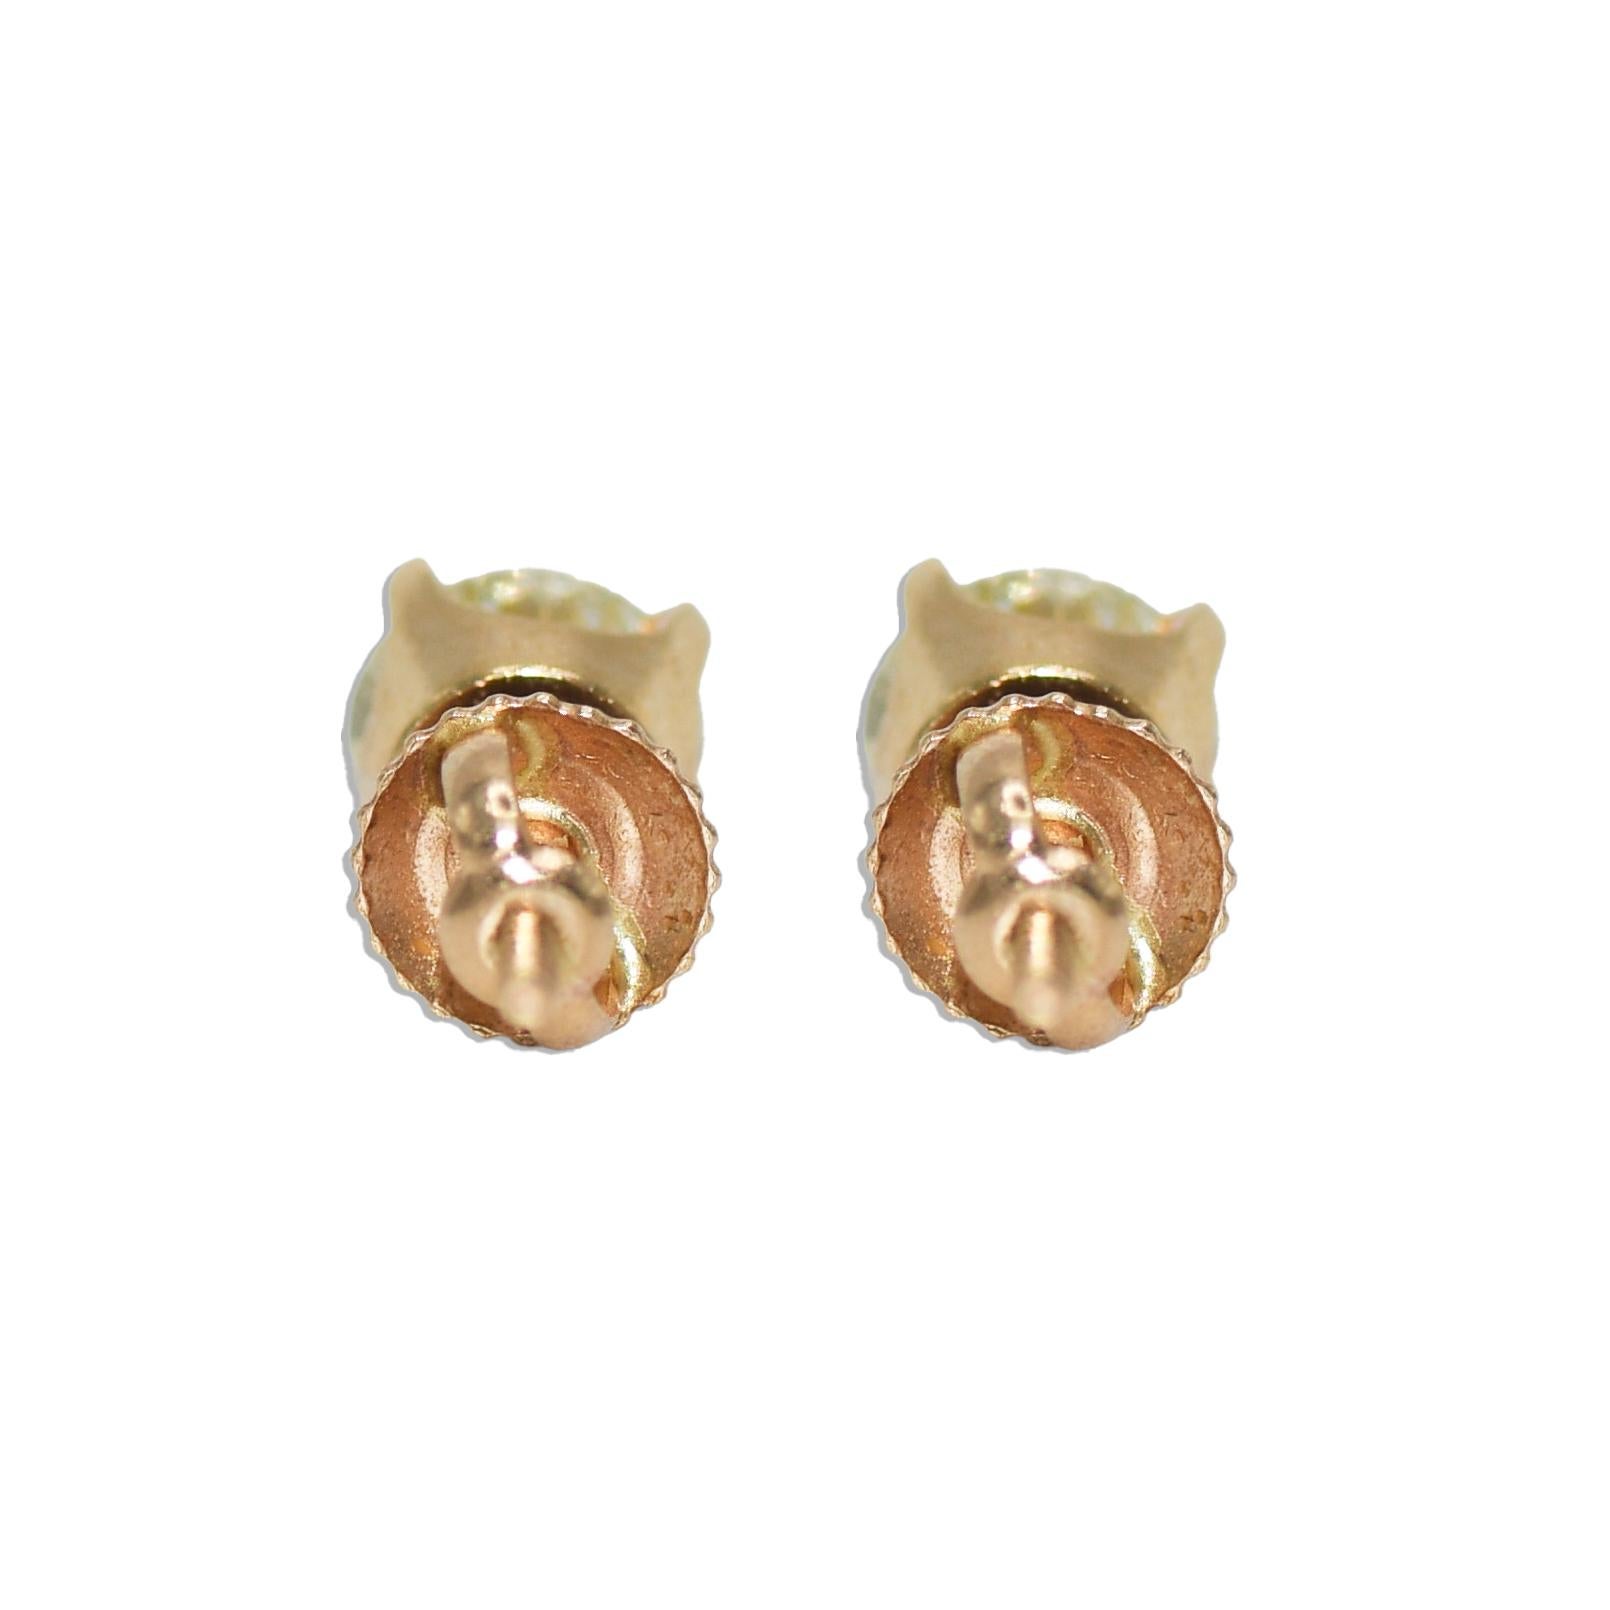 14K Yellow Gold Diamond Stud Earrings 1.50 carats In Excellent Condition For Sale In Laguna Beach, CA